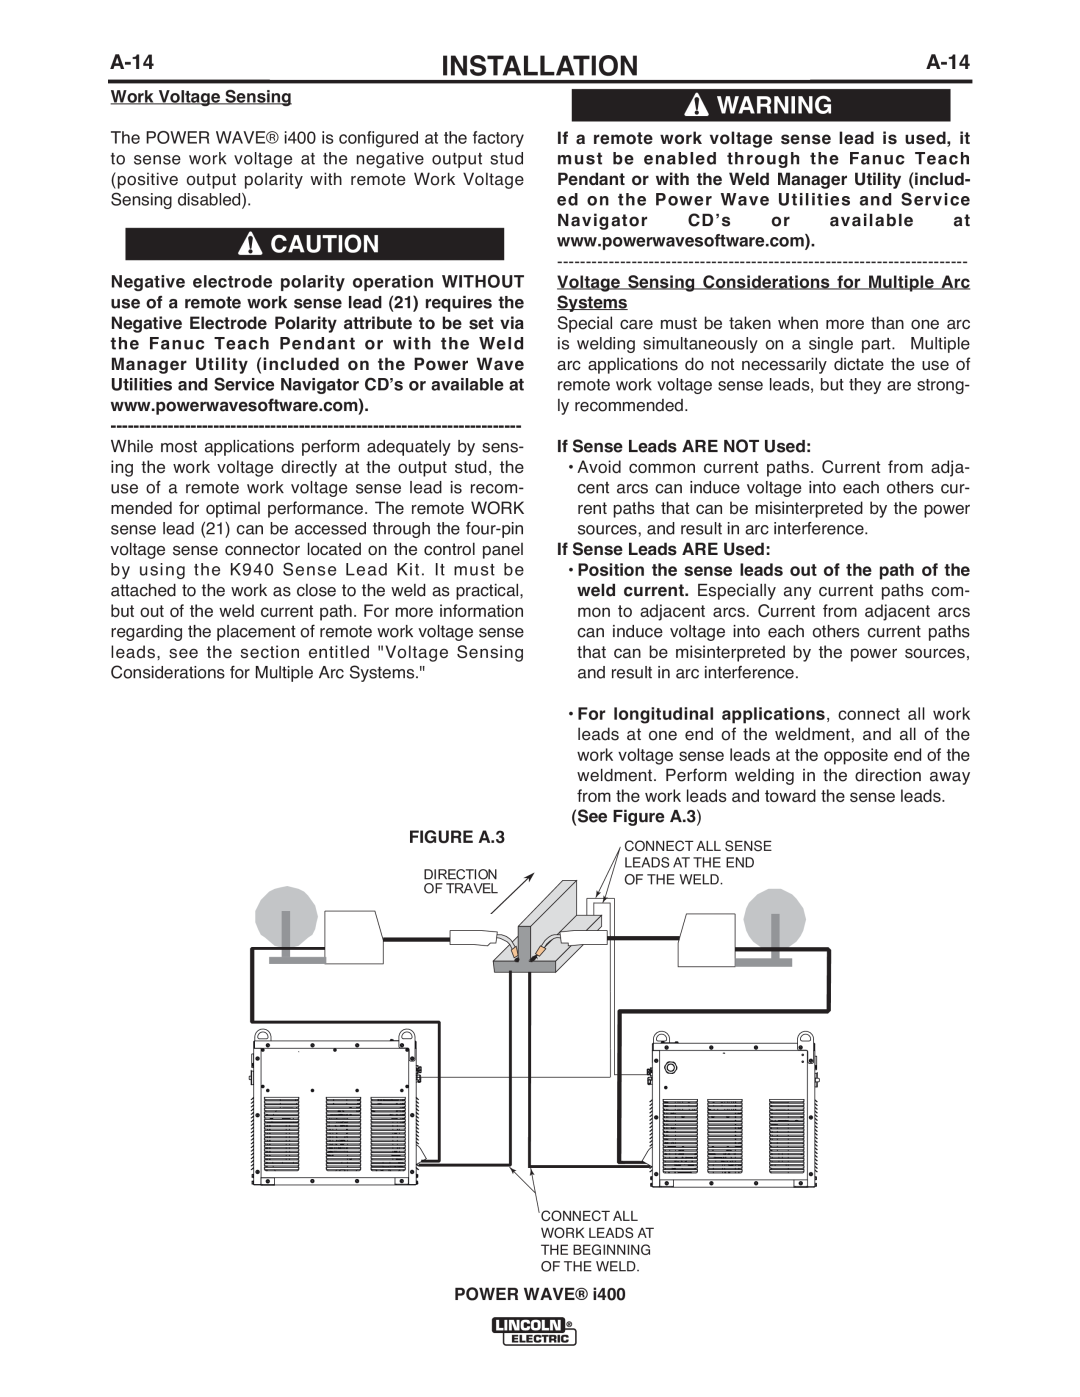 Lincoln Electric IM986 manual A-14, Installation, sources, and result in arc interference 